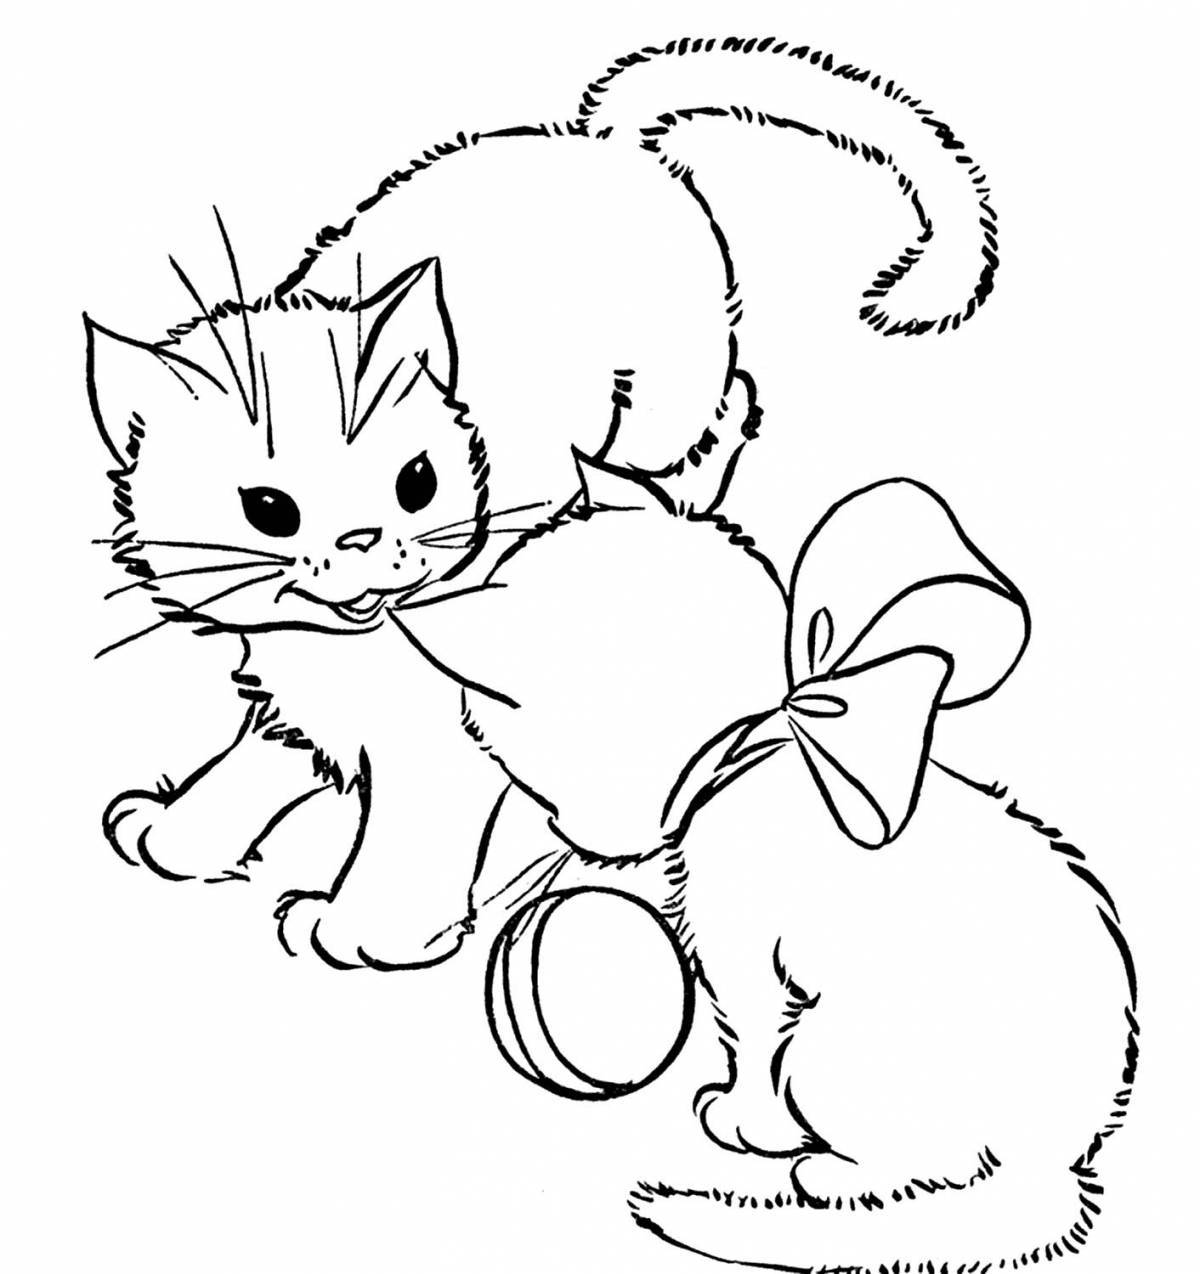 Sweet-nosed kitten coloring page for kids